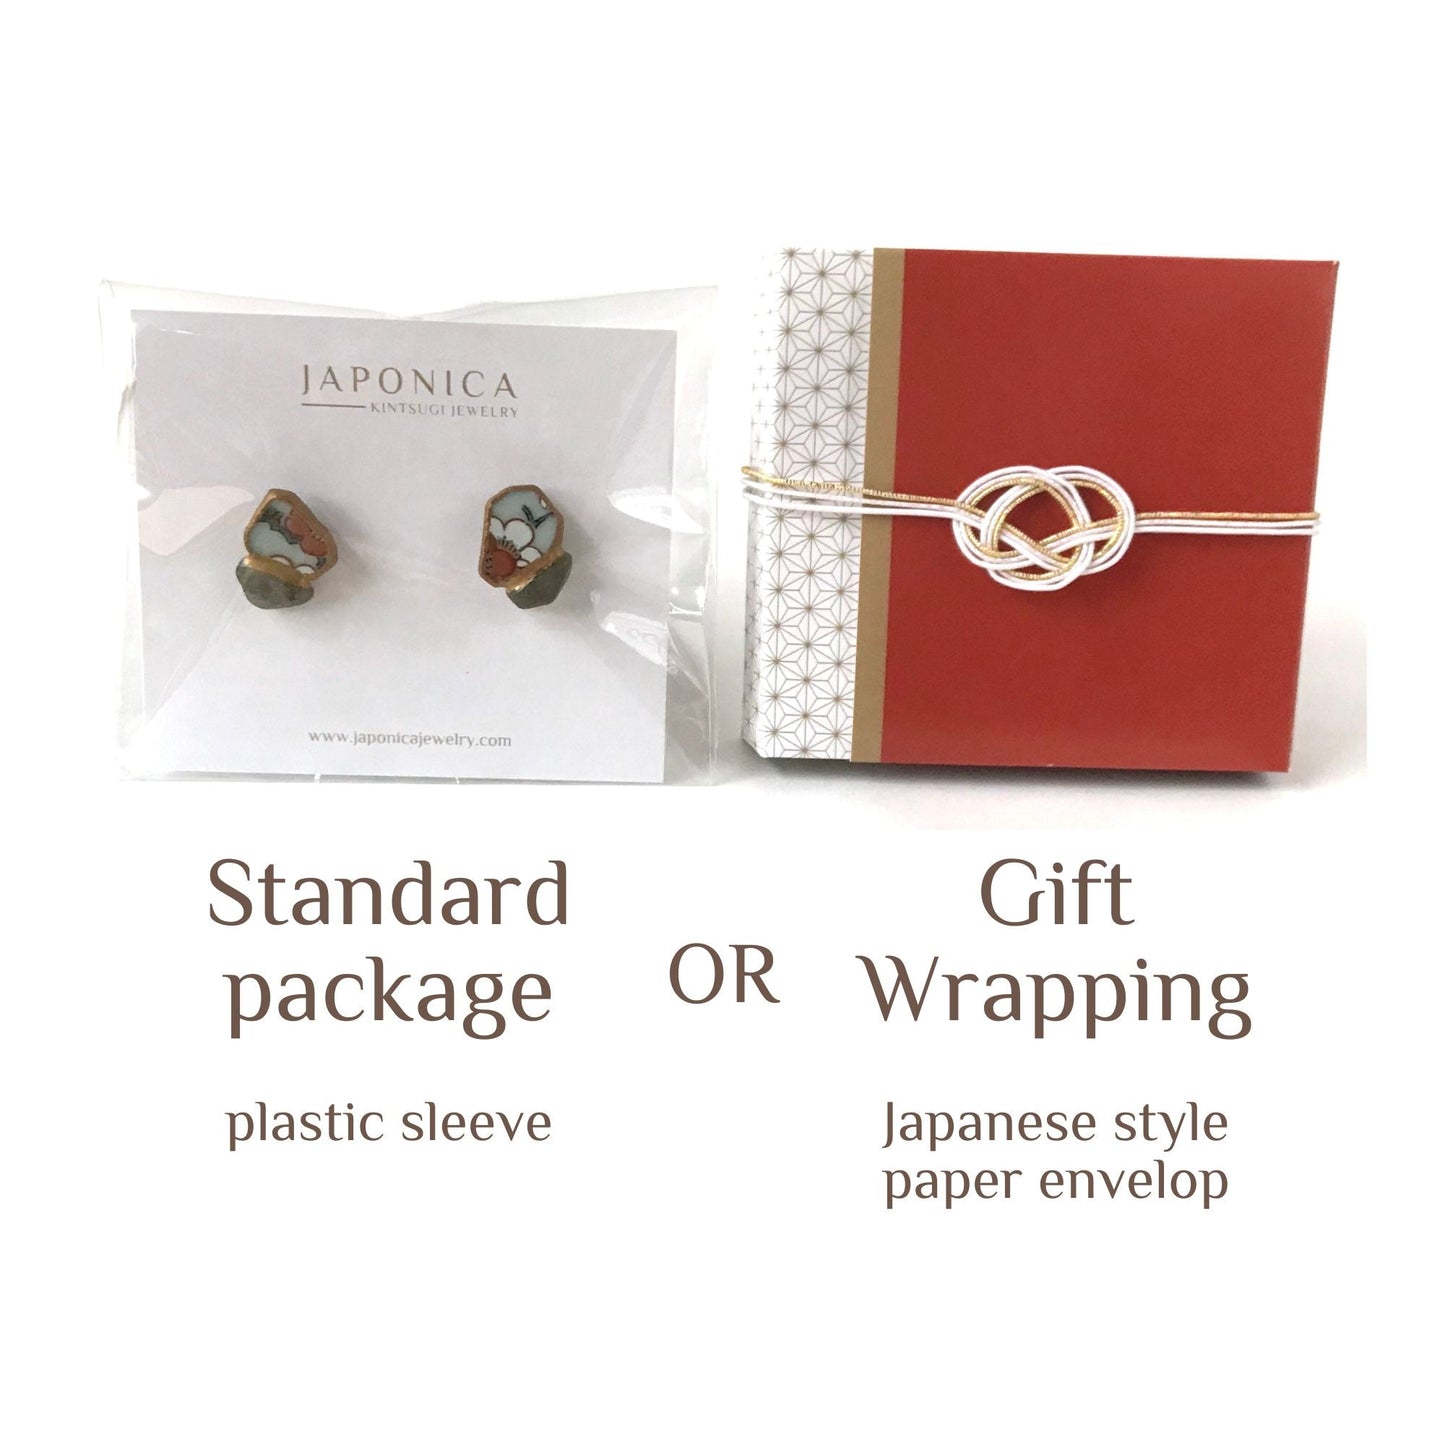 Kintsugi jewelry gift wrapping vs standard package-JAPONICA